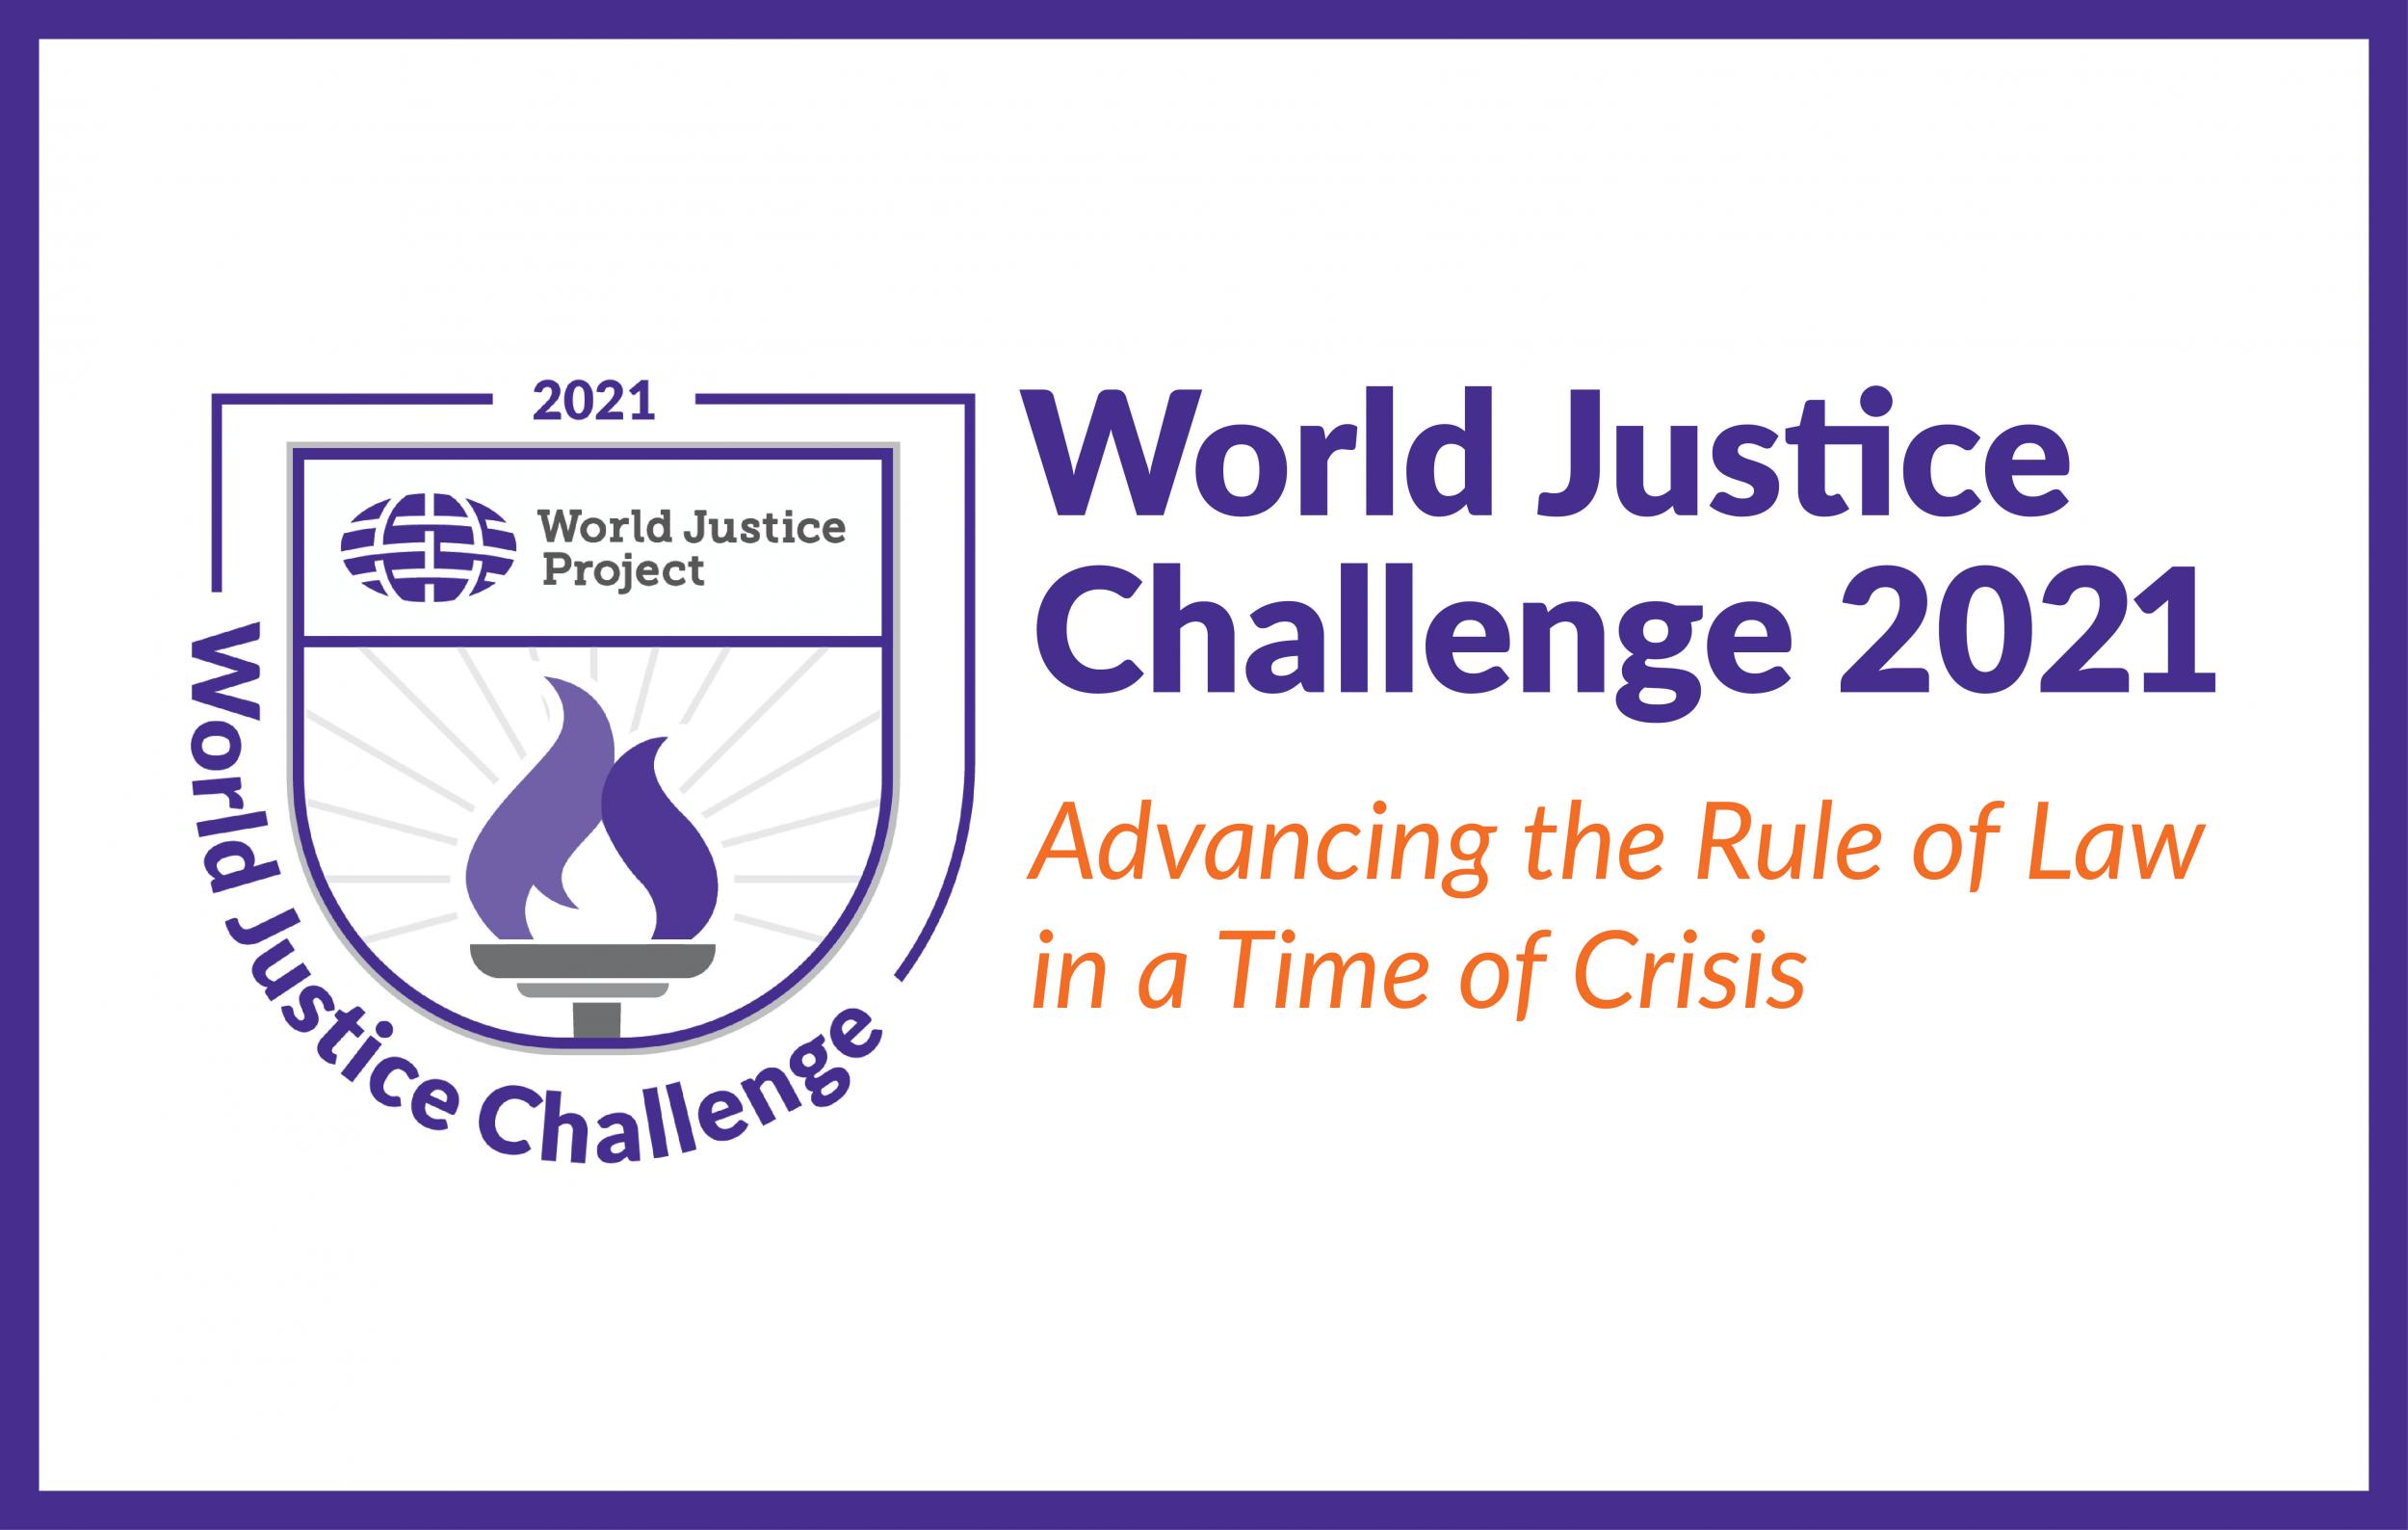 World Justice Challenge World Justice Project